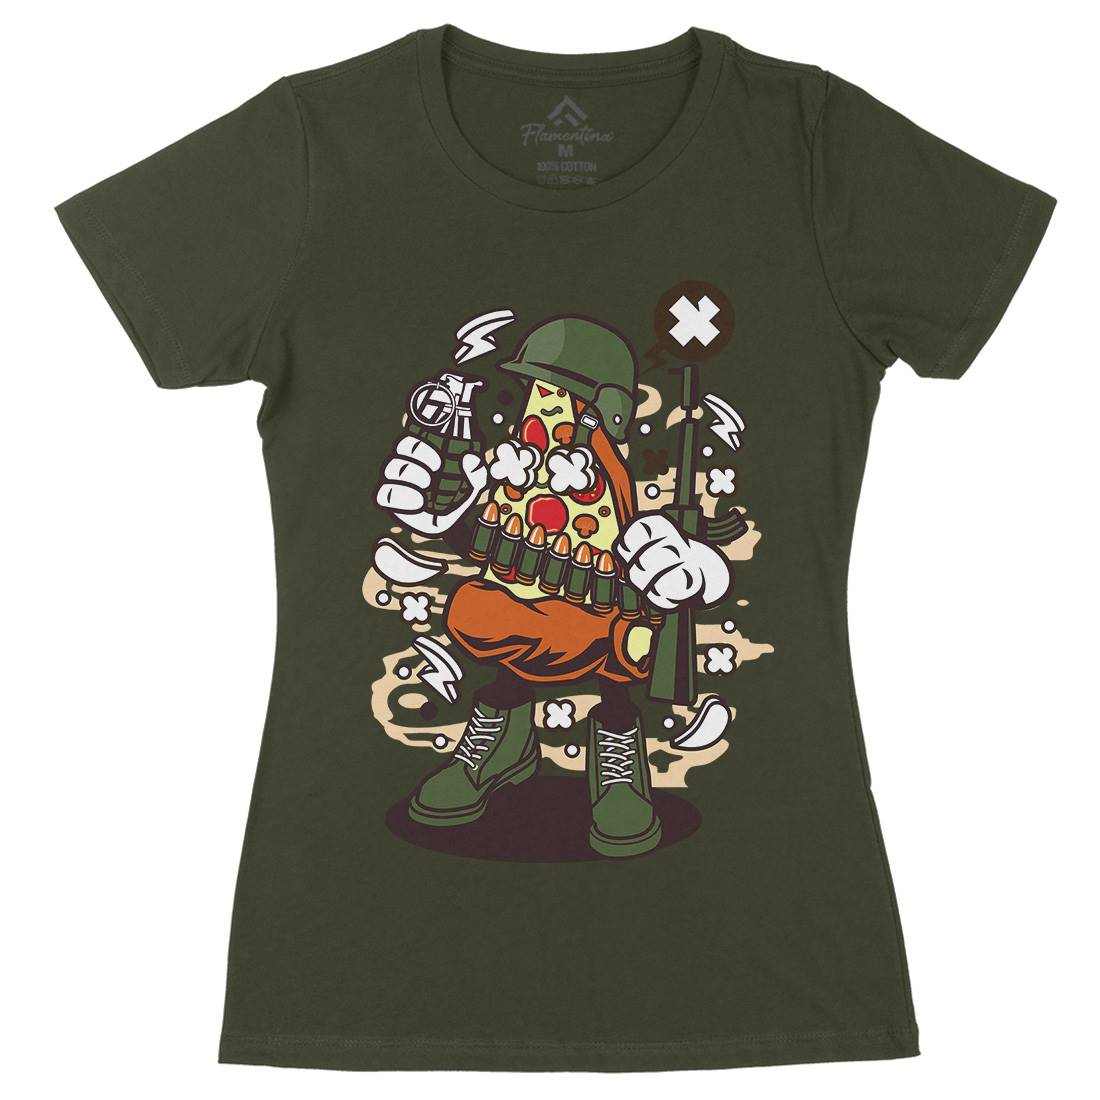 Soldier Pizza Womens Organic Crew Neck T-Shirt Army C254